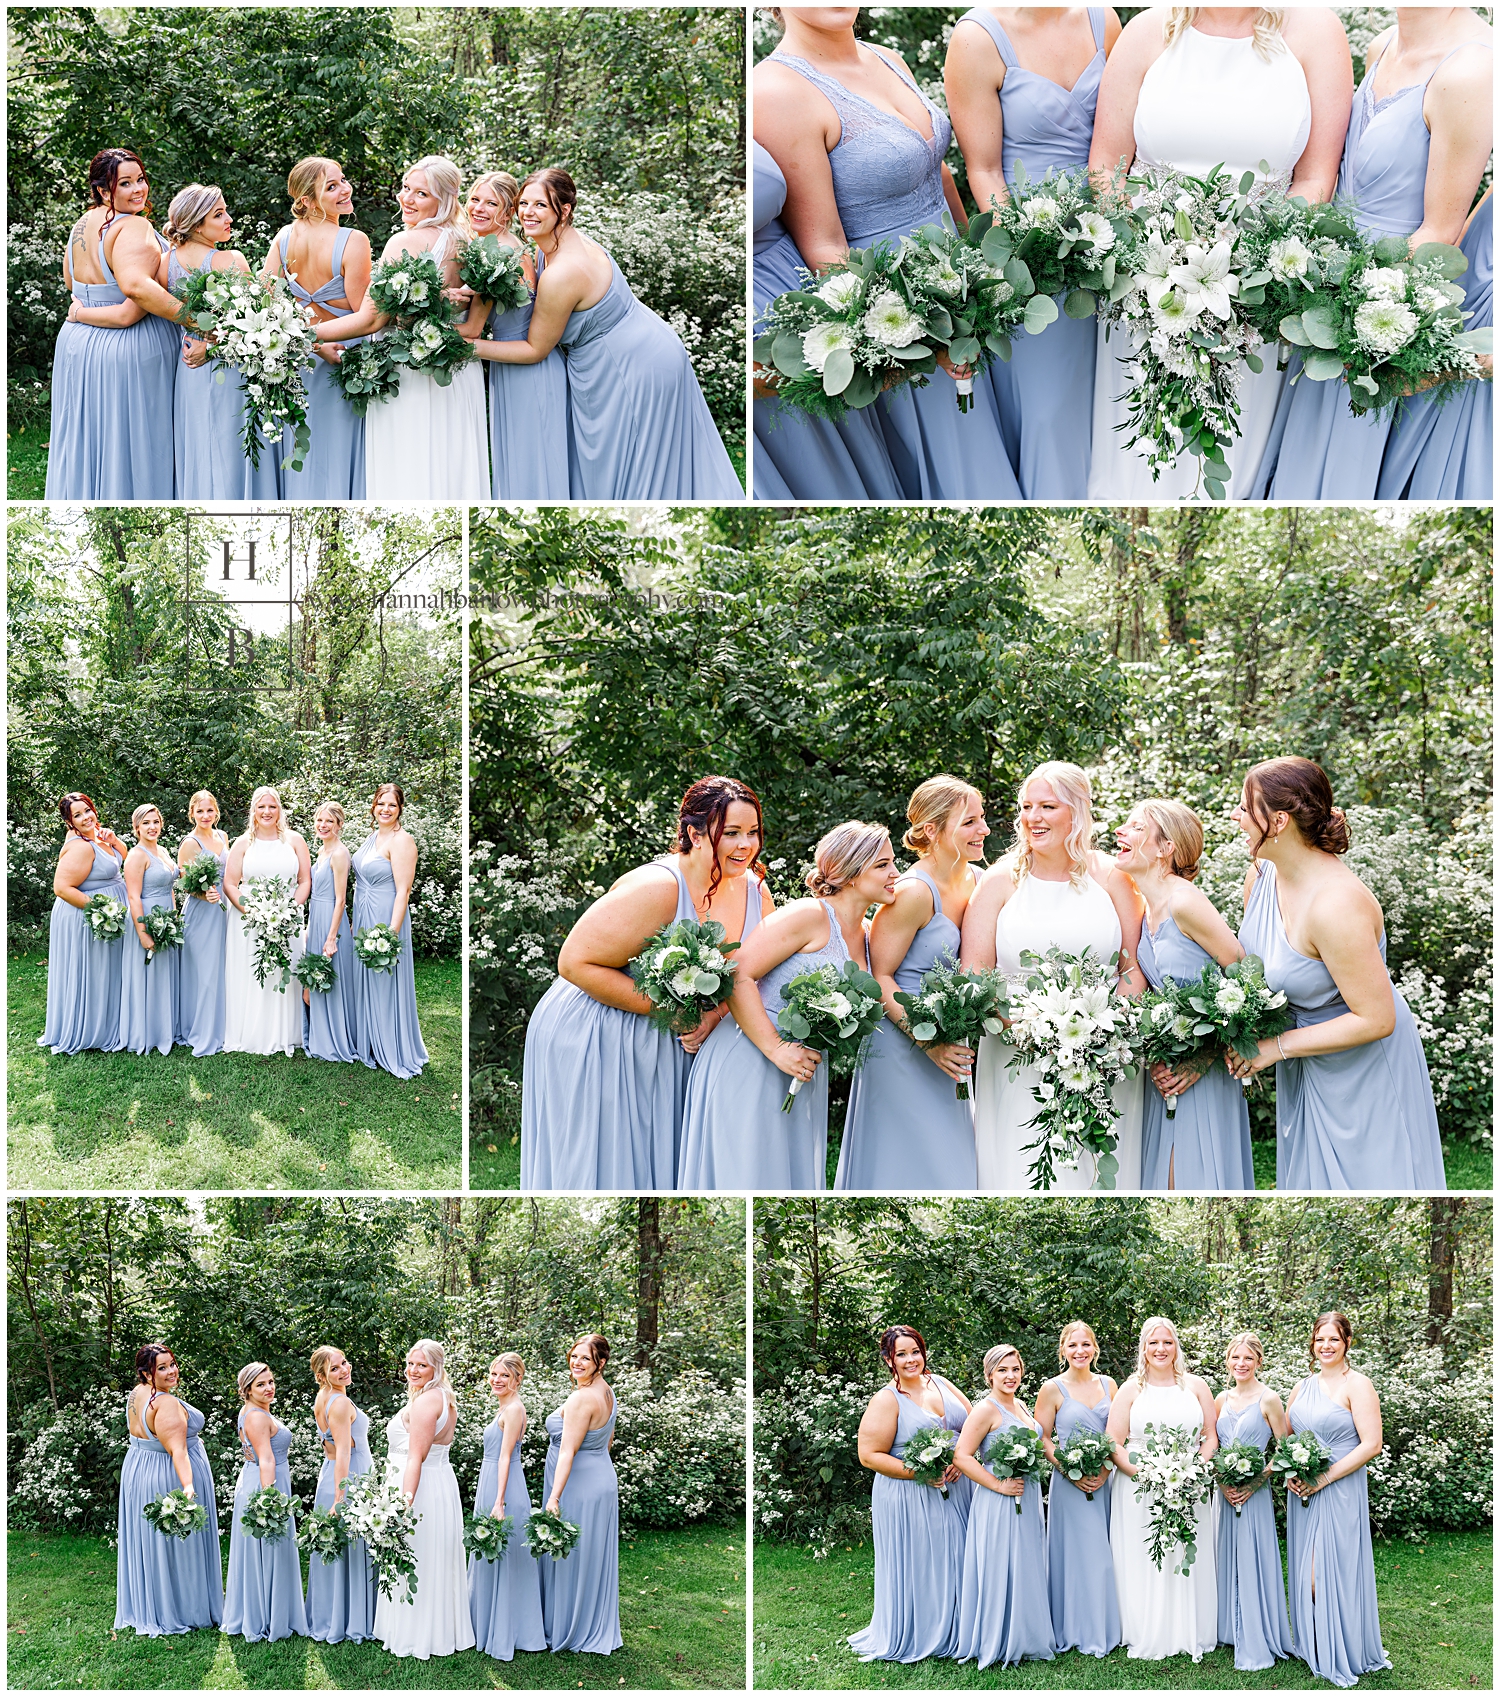 Bridesmaids in pale blue dresses pose for wedding photos